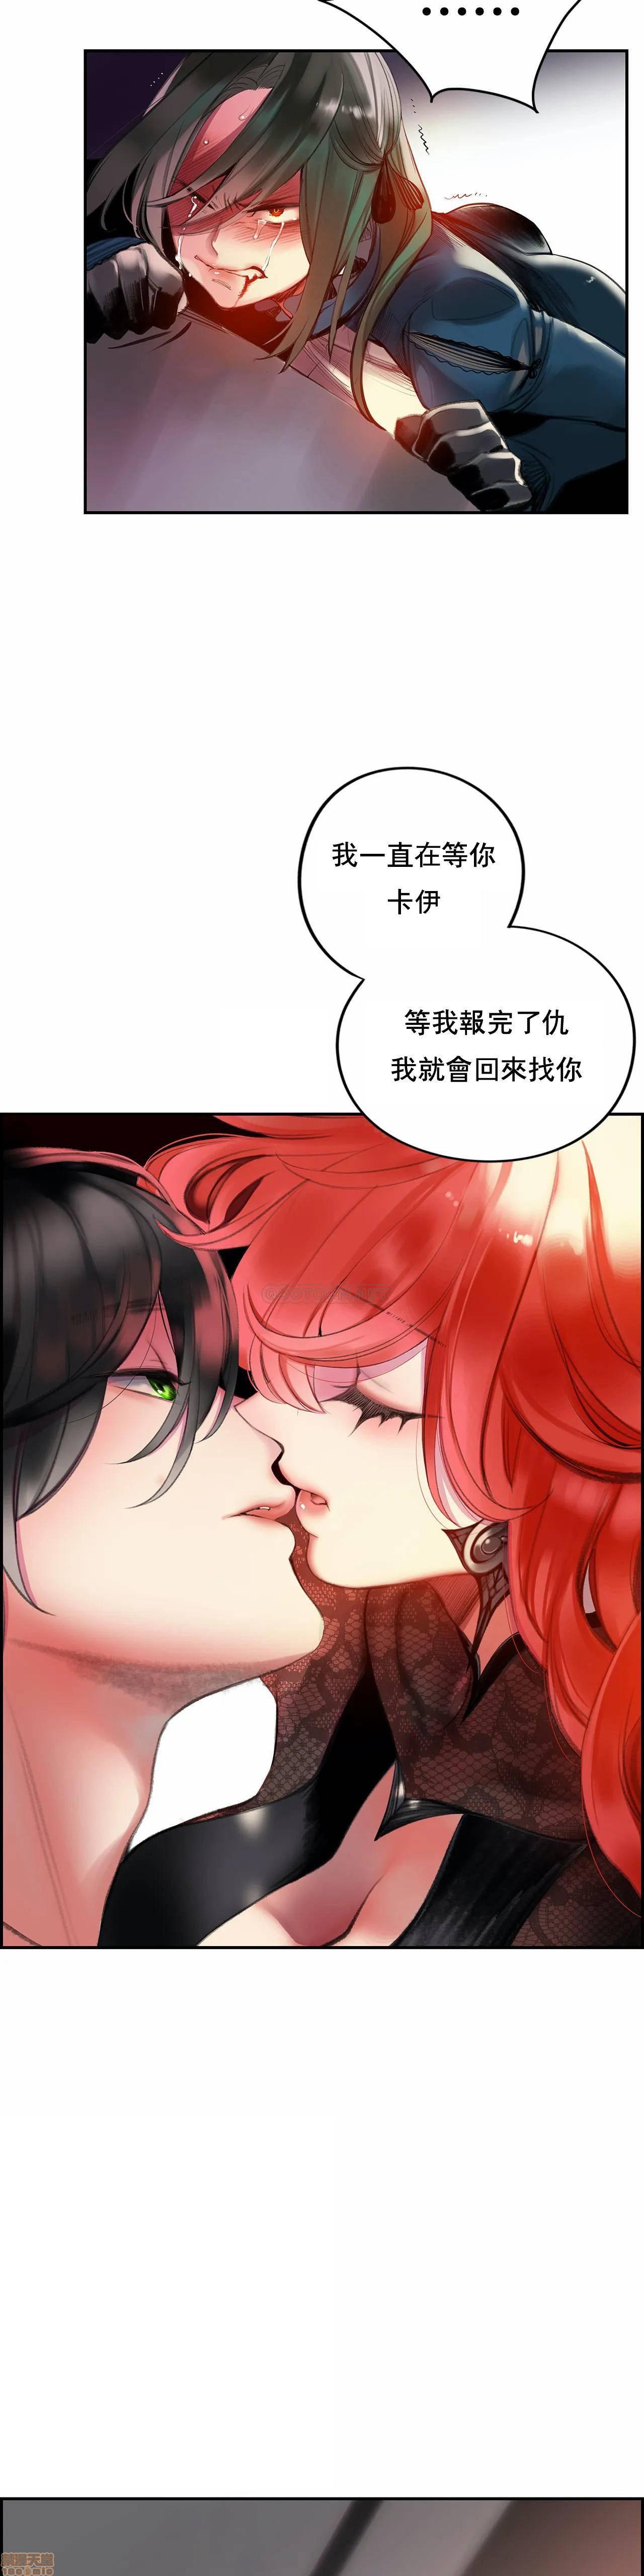 [Juder] Lilith`s Cord (第二季) Ch.77-93 end [Chinese] 84